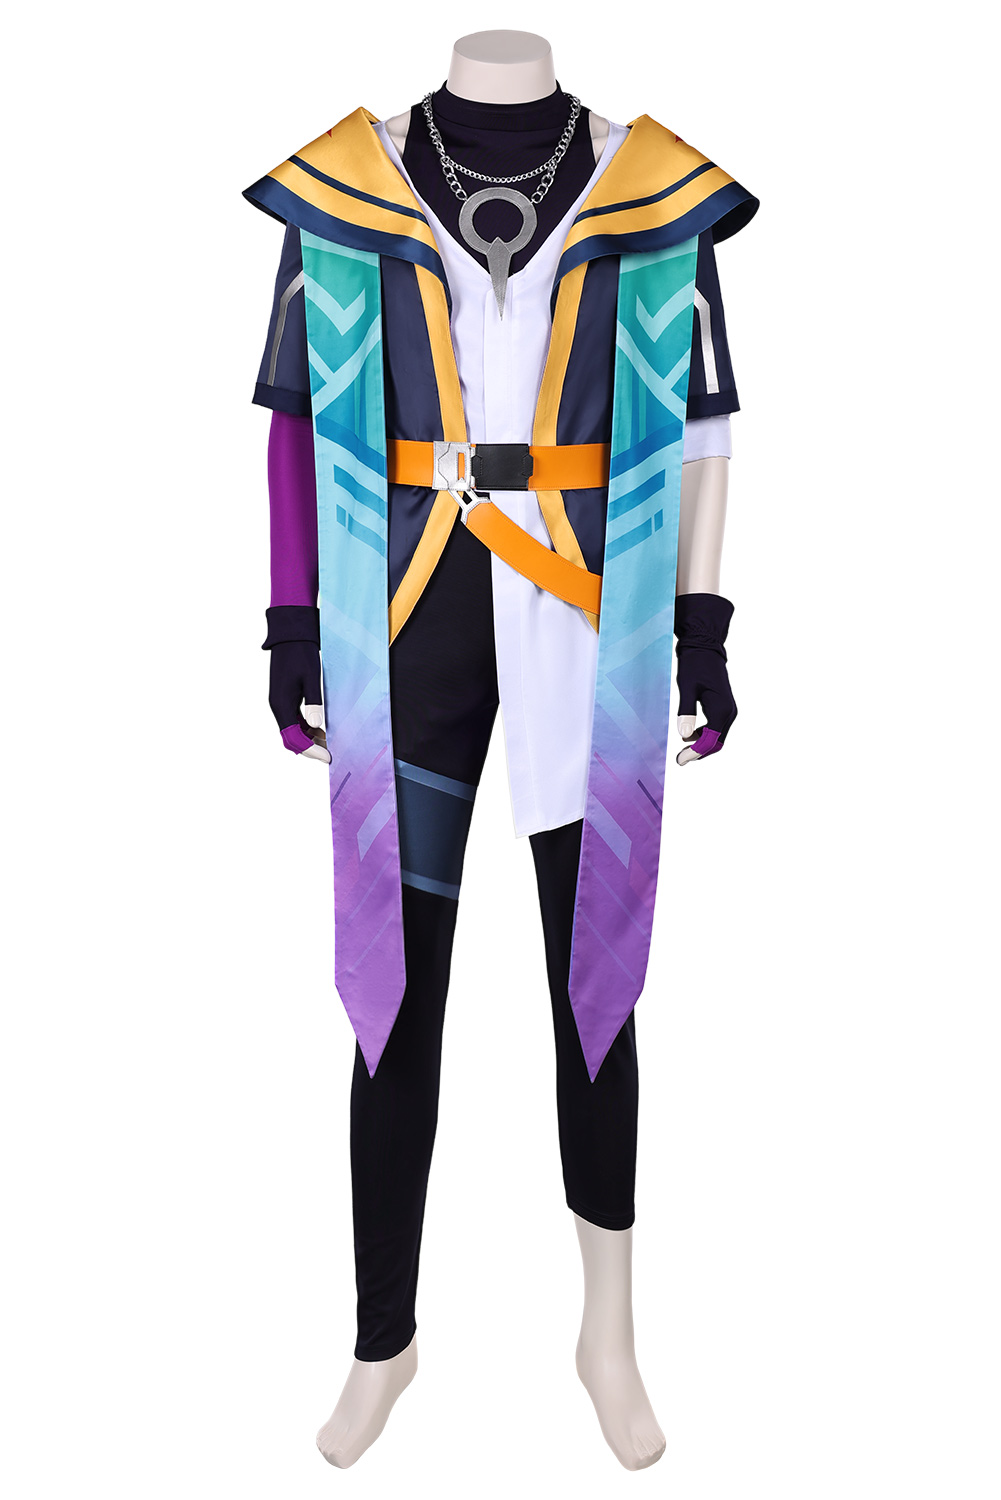 Game League of Legends Heart of Steel Aphelios Full Set Outfits Halloween Carnival Suit Cosplay Costume